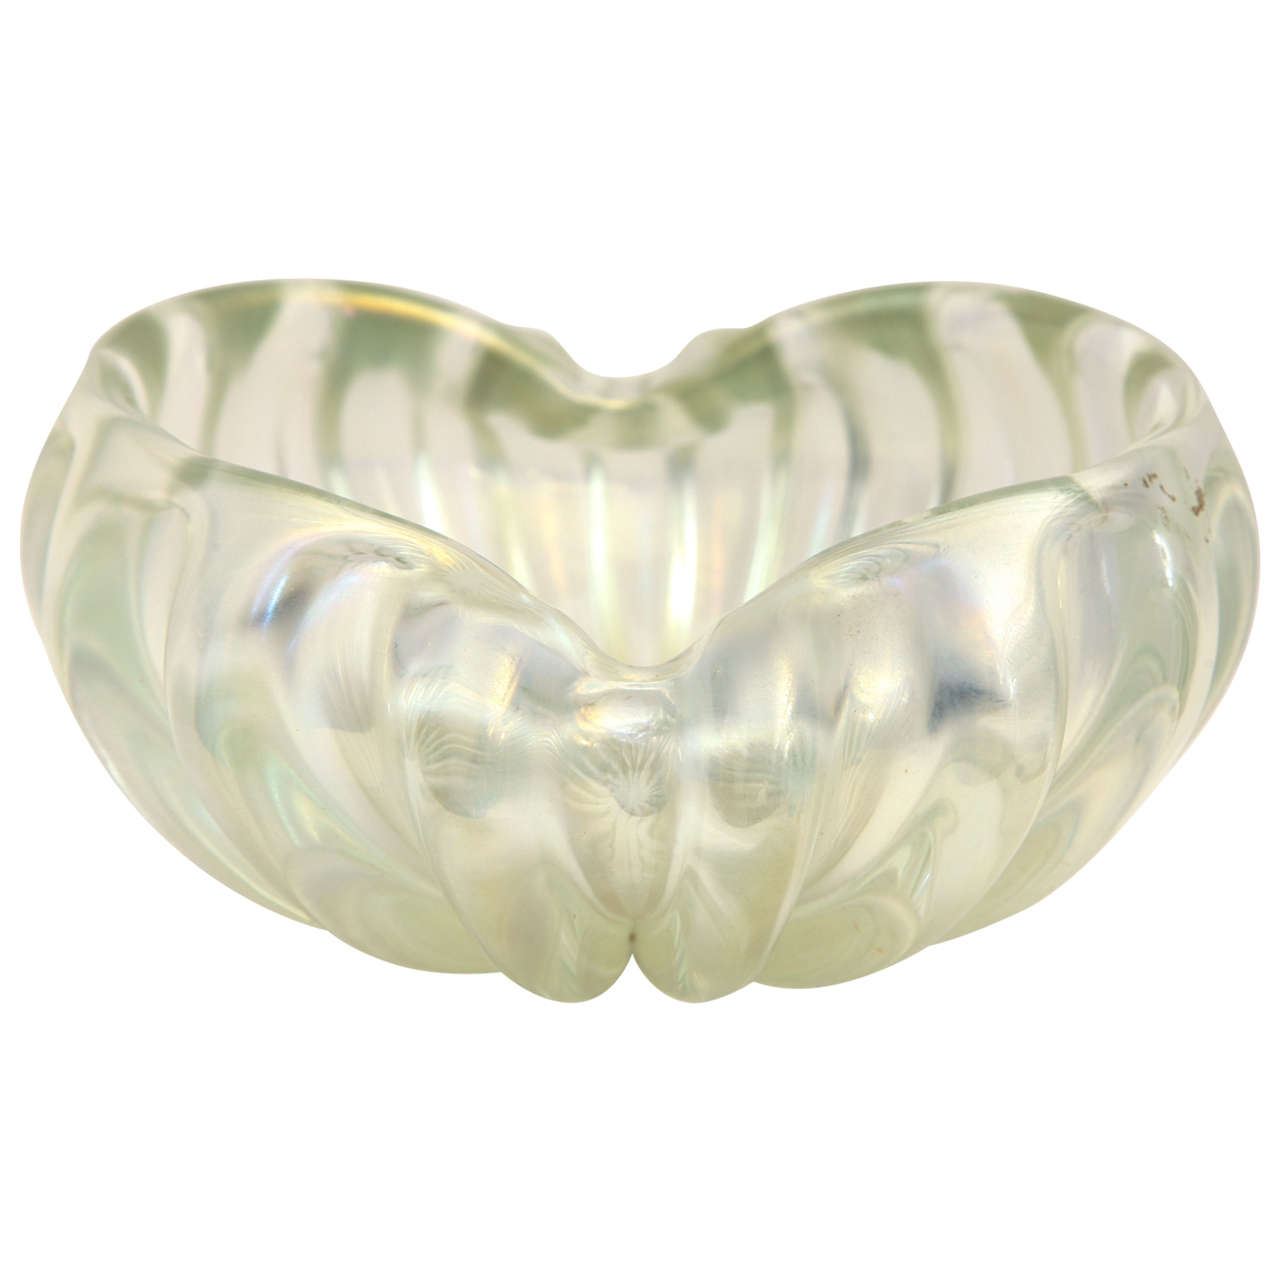 Small Clear Murano Glass Bowl